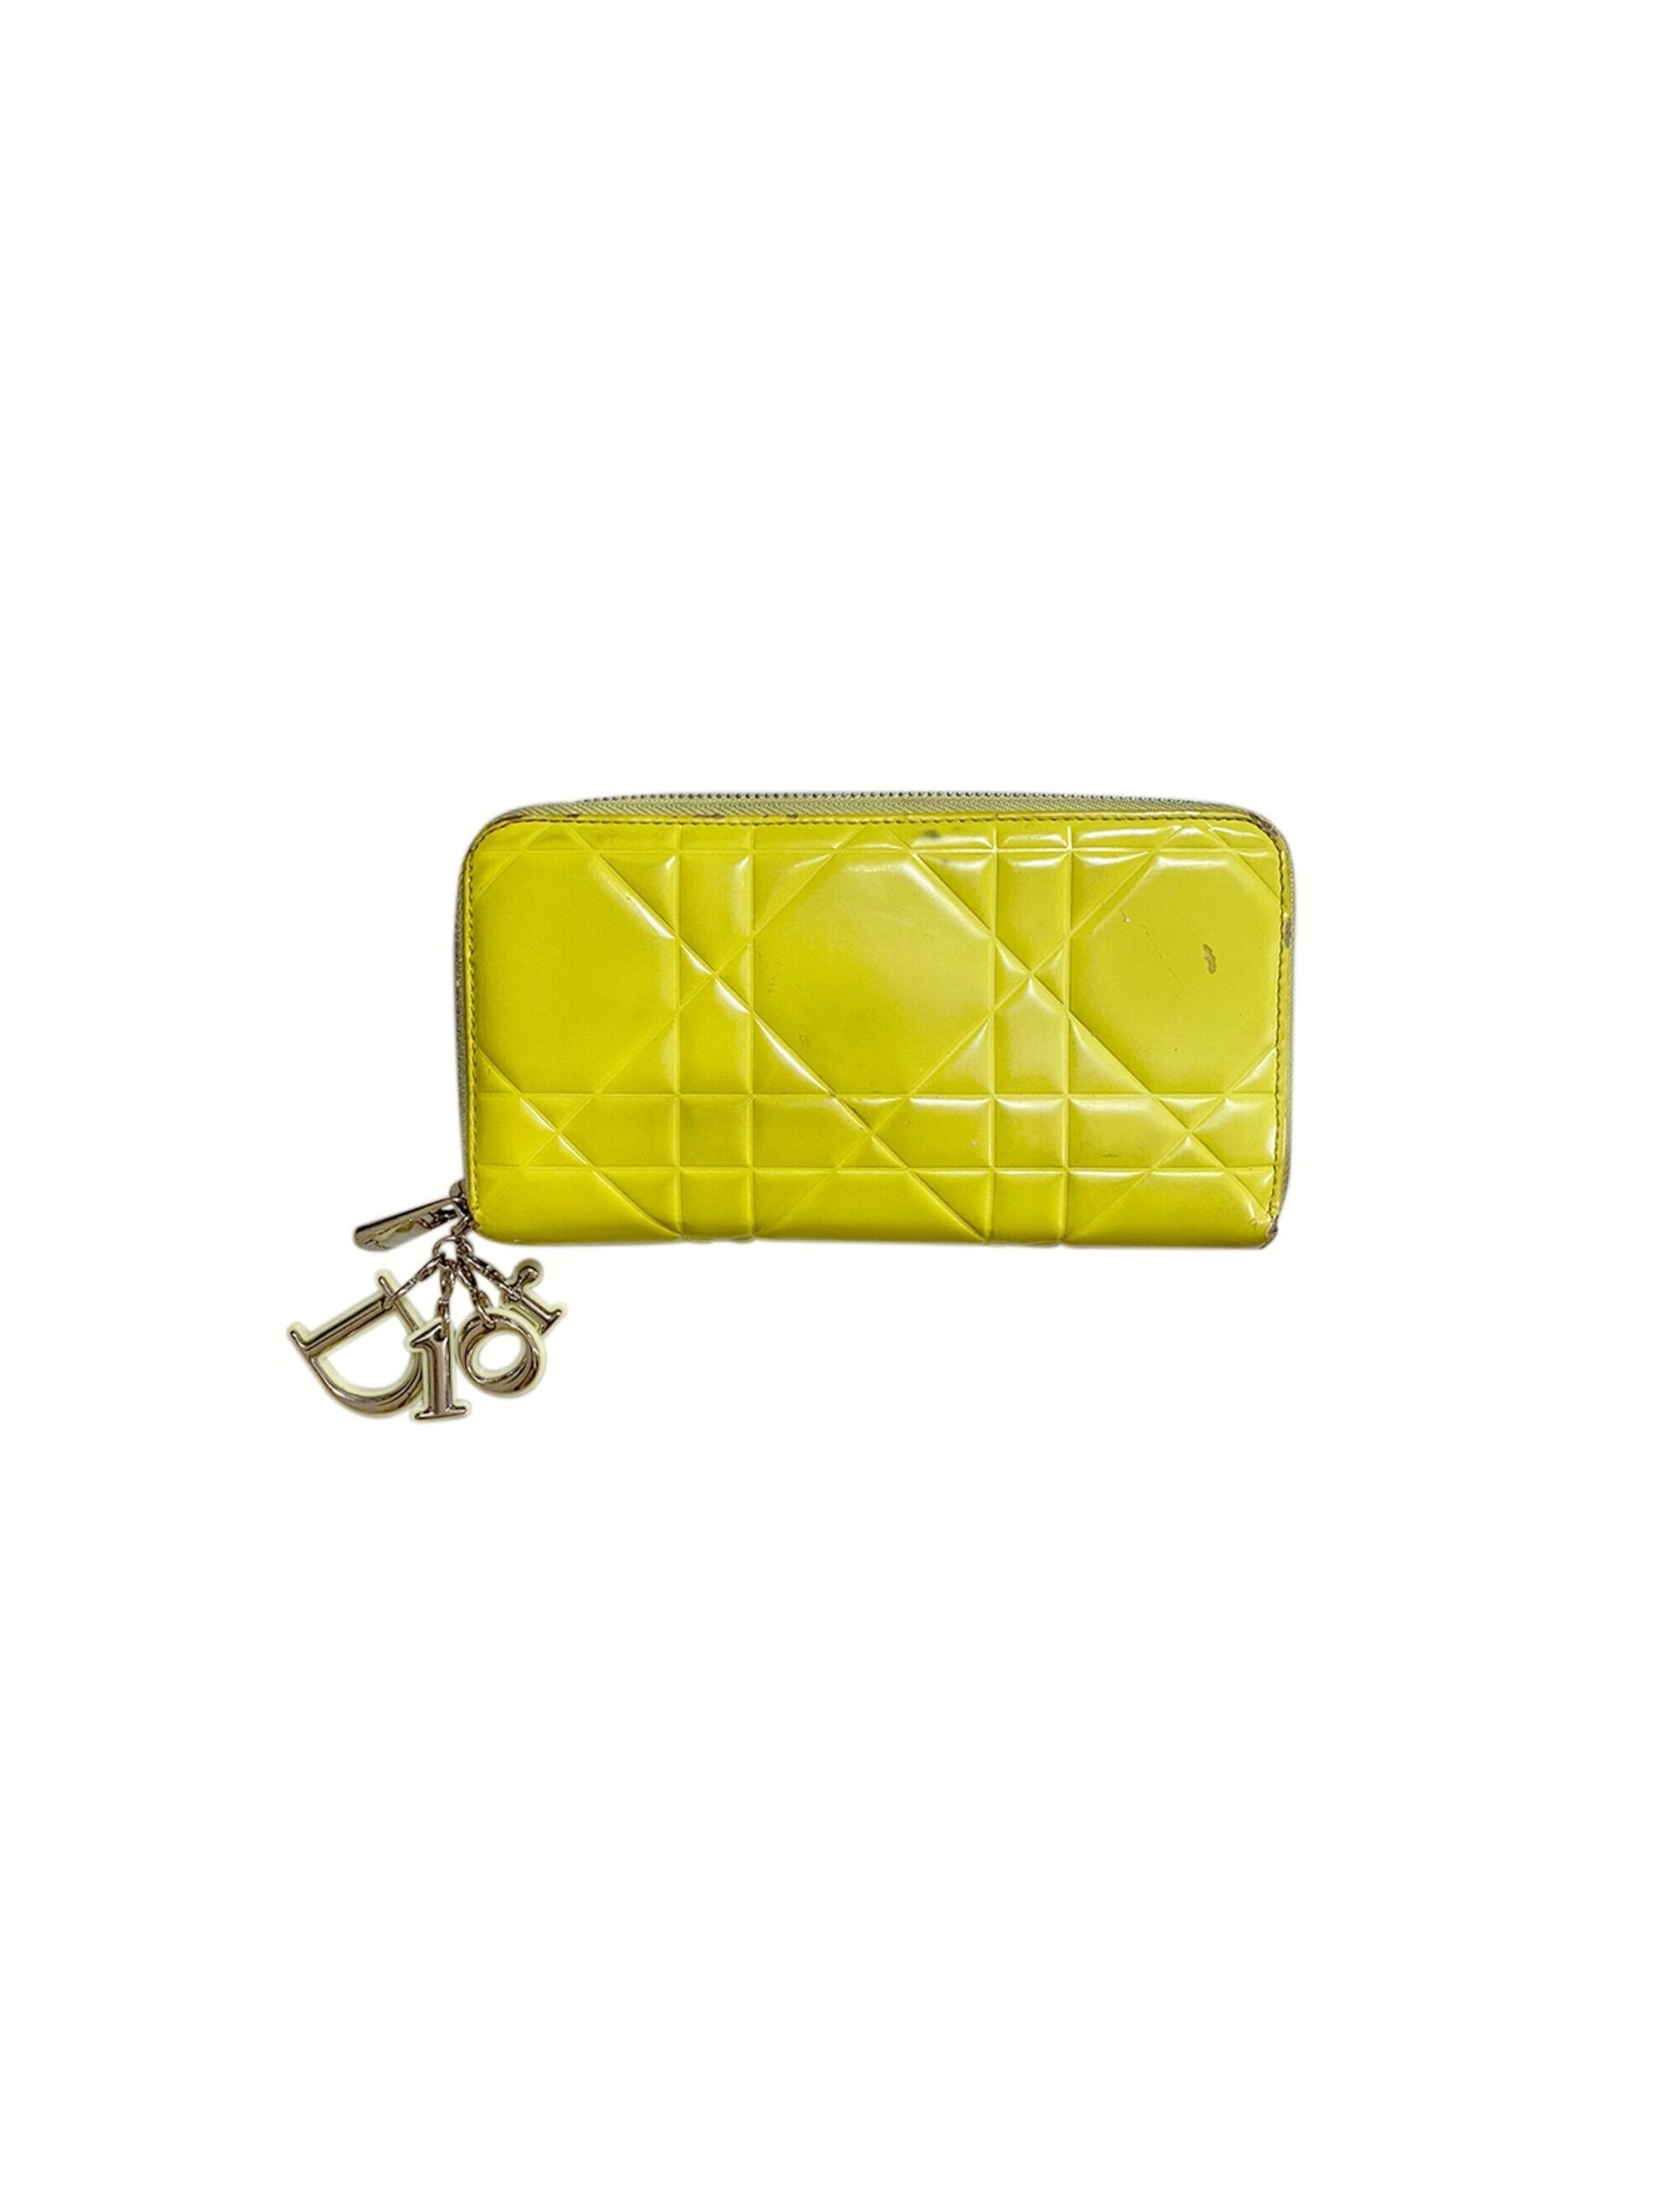 Christian Dior 2000s Quilted Yellow-Green Clutch · INTO